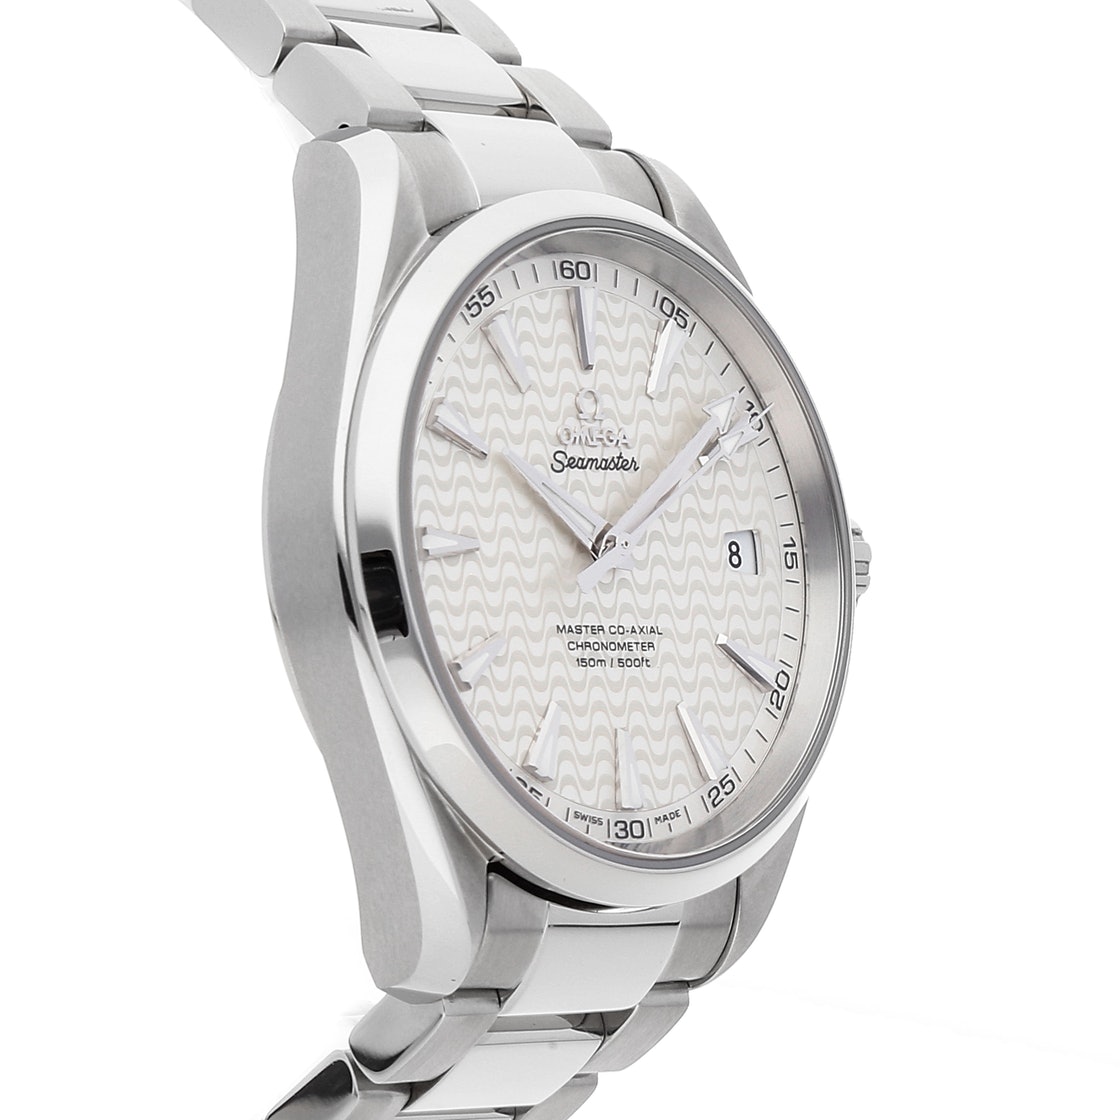 The elegant copy watches have white dials.